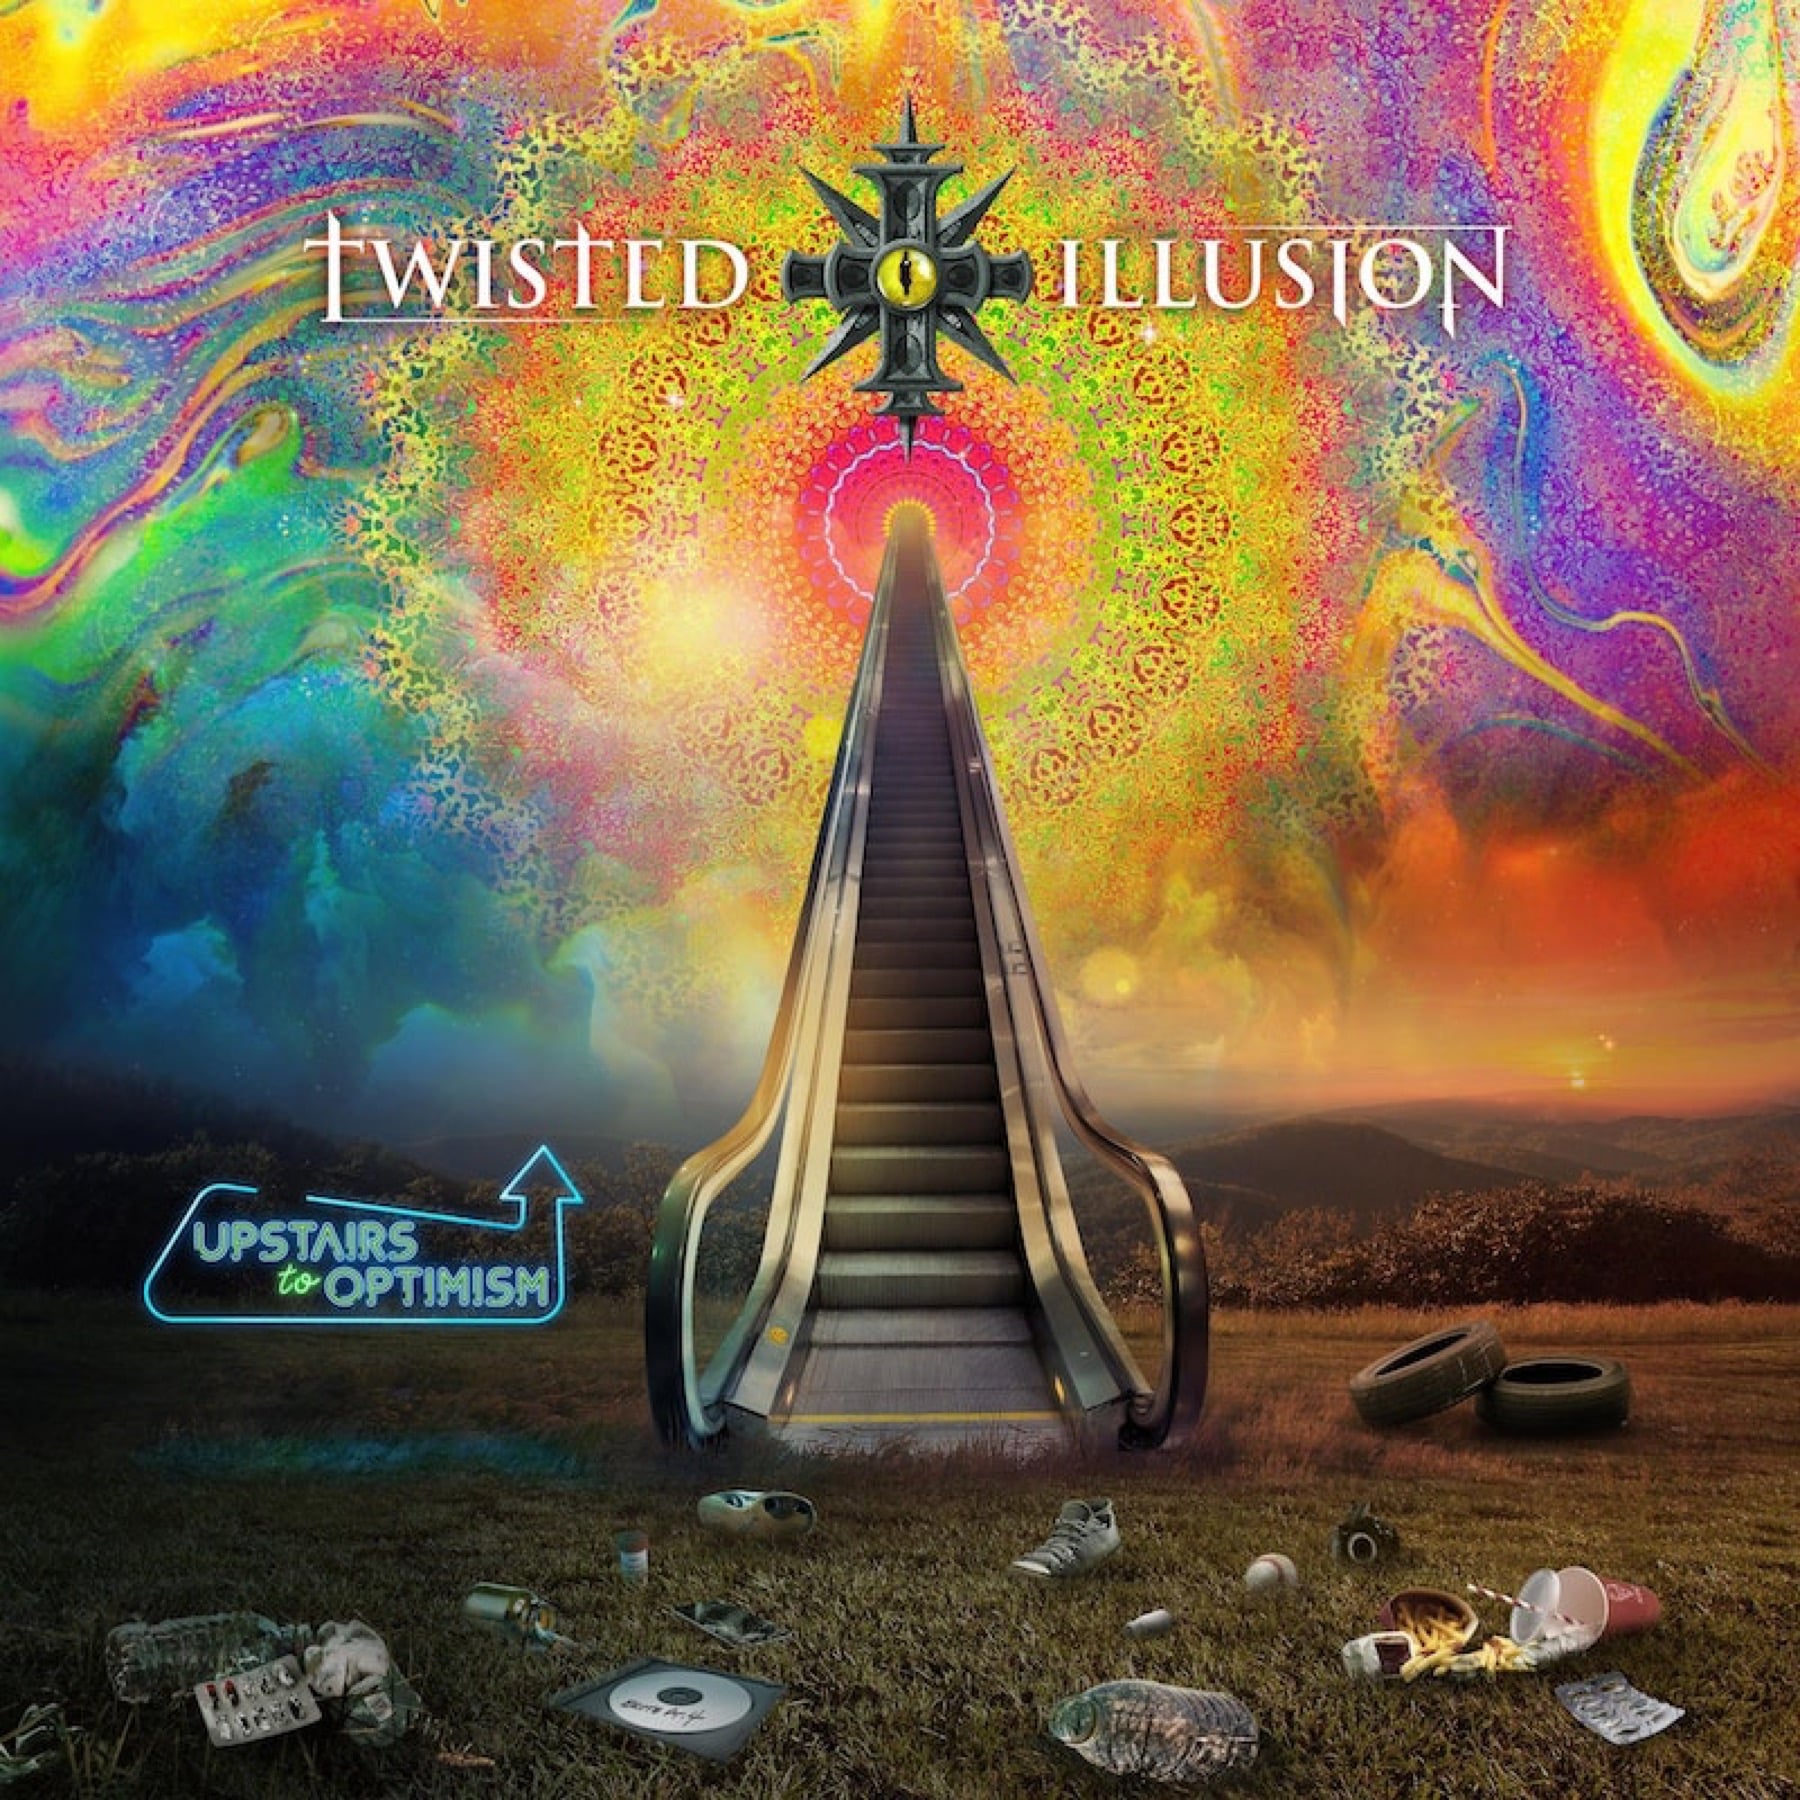 Twisted illusion - Upstairs to Optimism